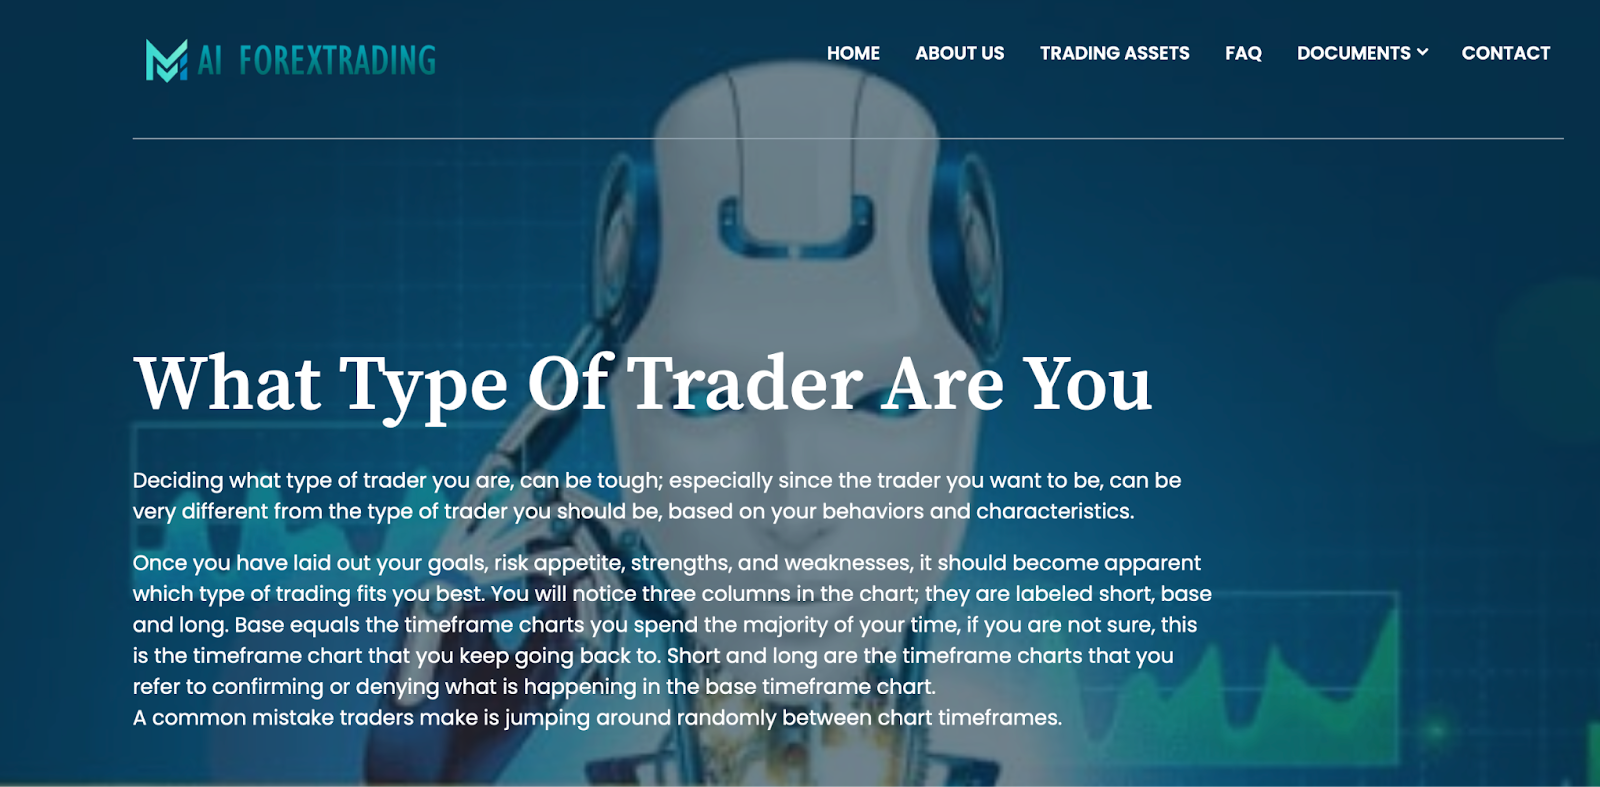 AI ForexTrading is an investment platform with an integrated automated trading system